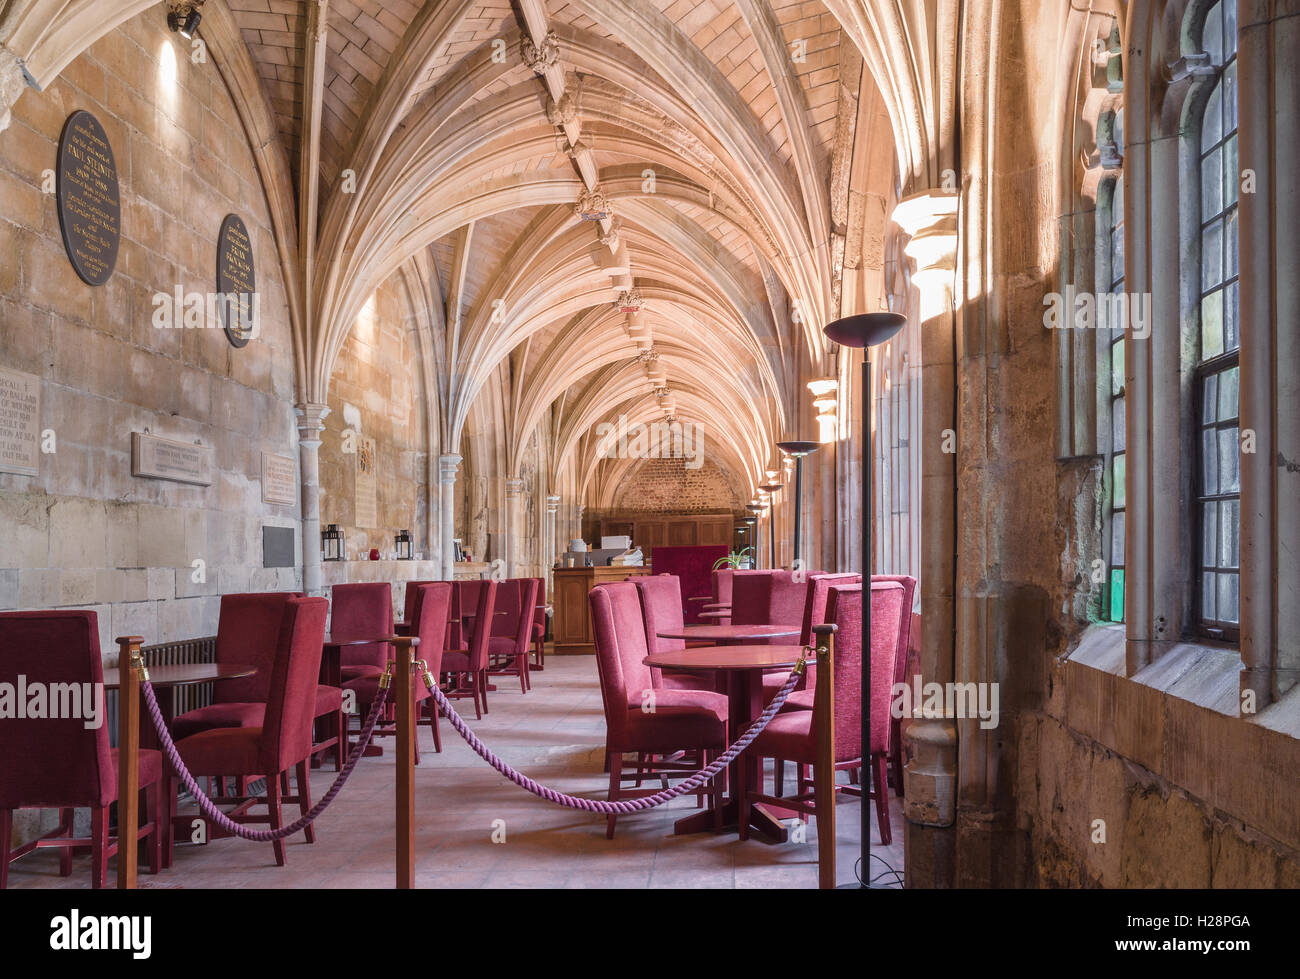 Cafe in the cloister of the christian church of St Bartholomew (St Bart's), the oldest surviving church in London. Stock Photo